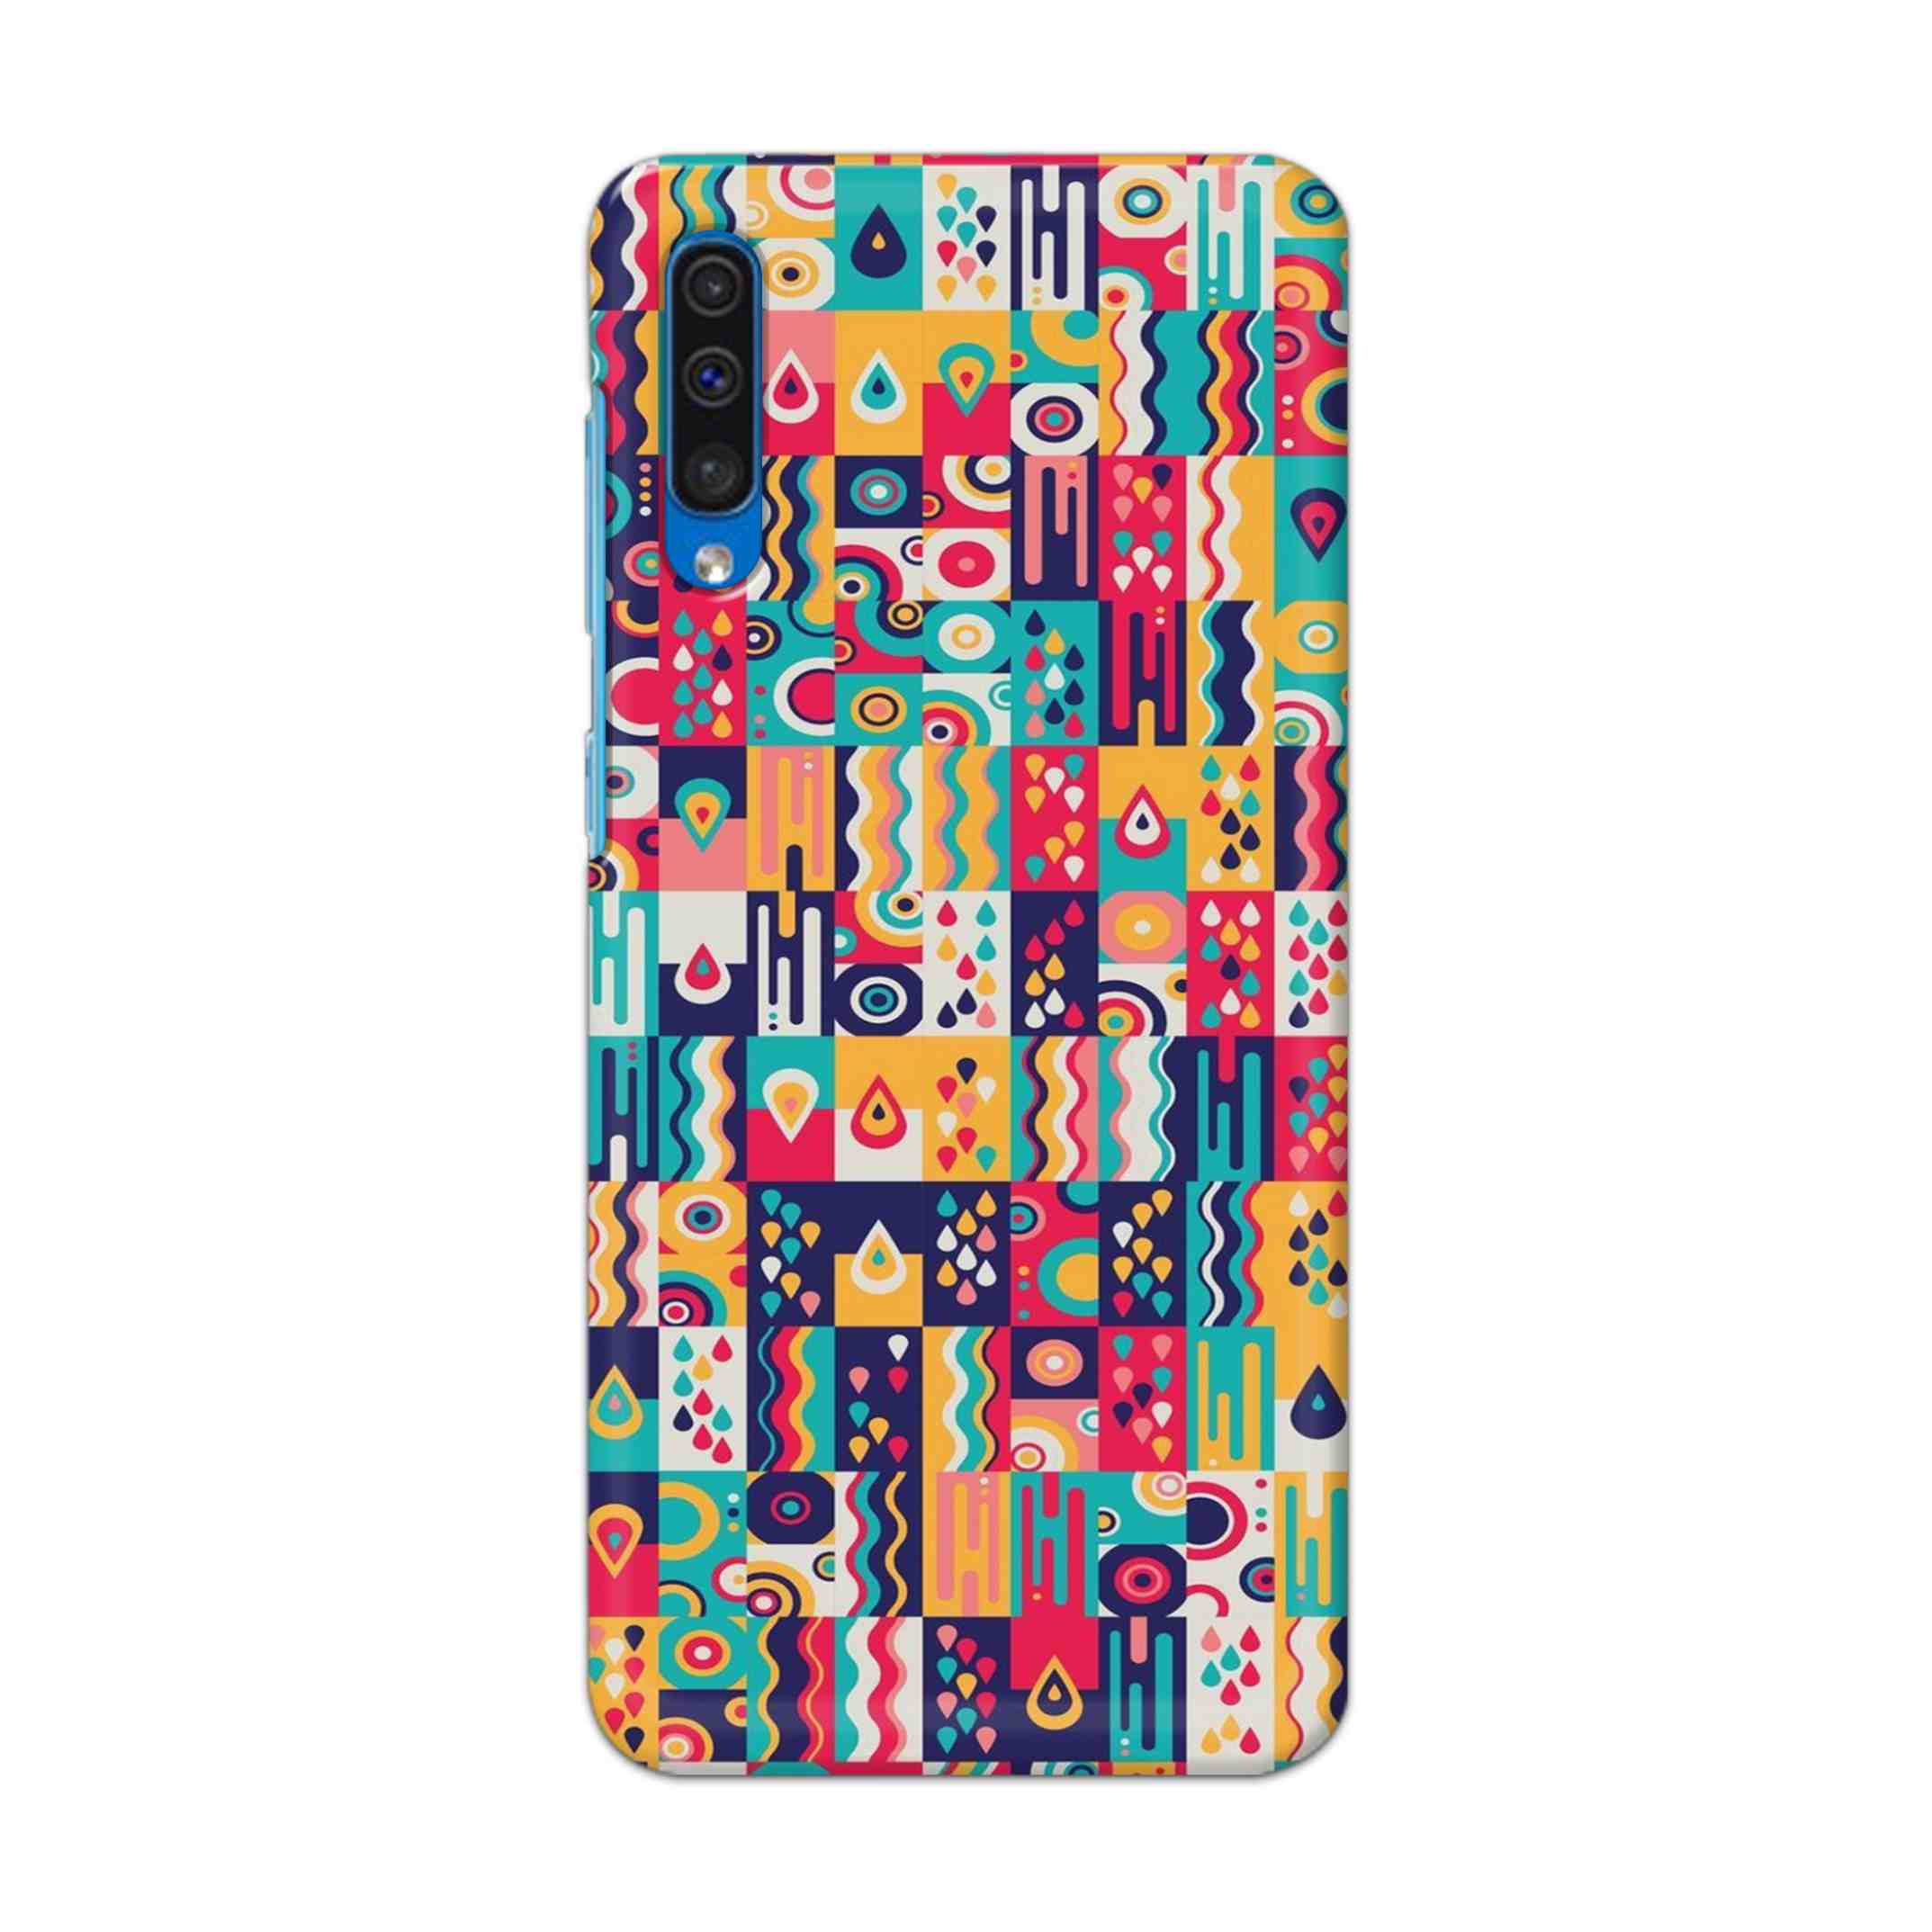 Buy Art Hard Back Mobile Phone Case Cover For Samsung Galaxy A50 / A50s / A30s Online